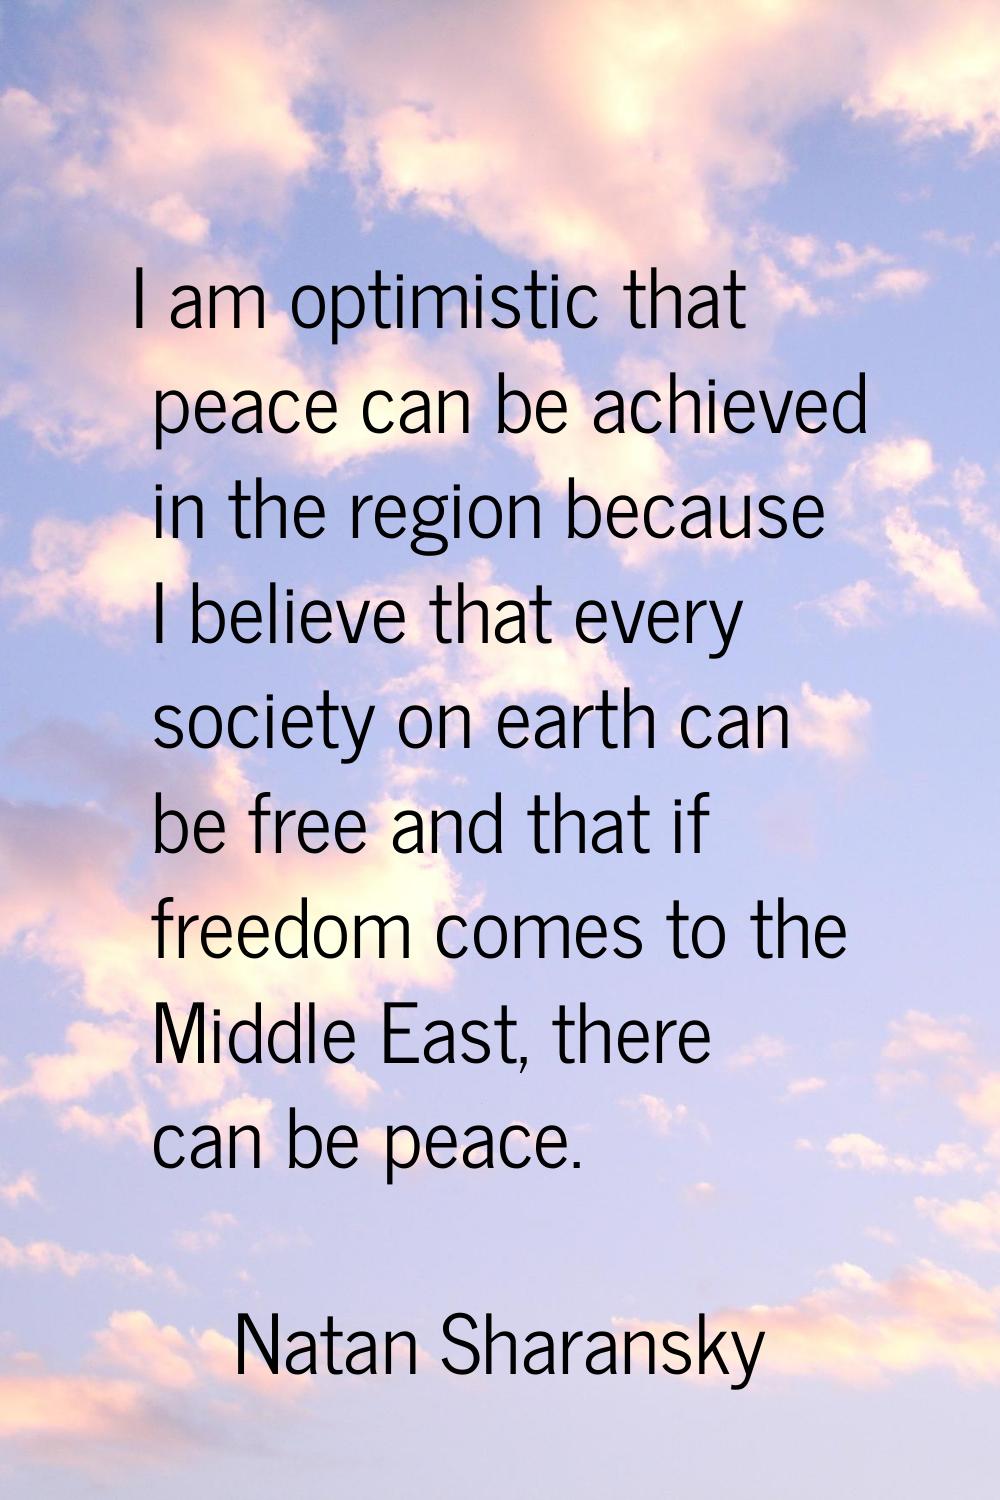 I am optimistic that peace can be achieved in the region because I believe that every society on ea